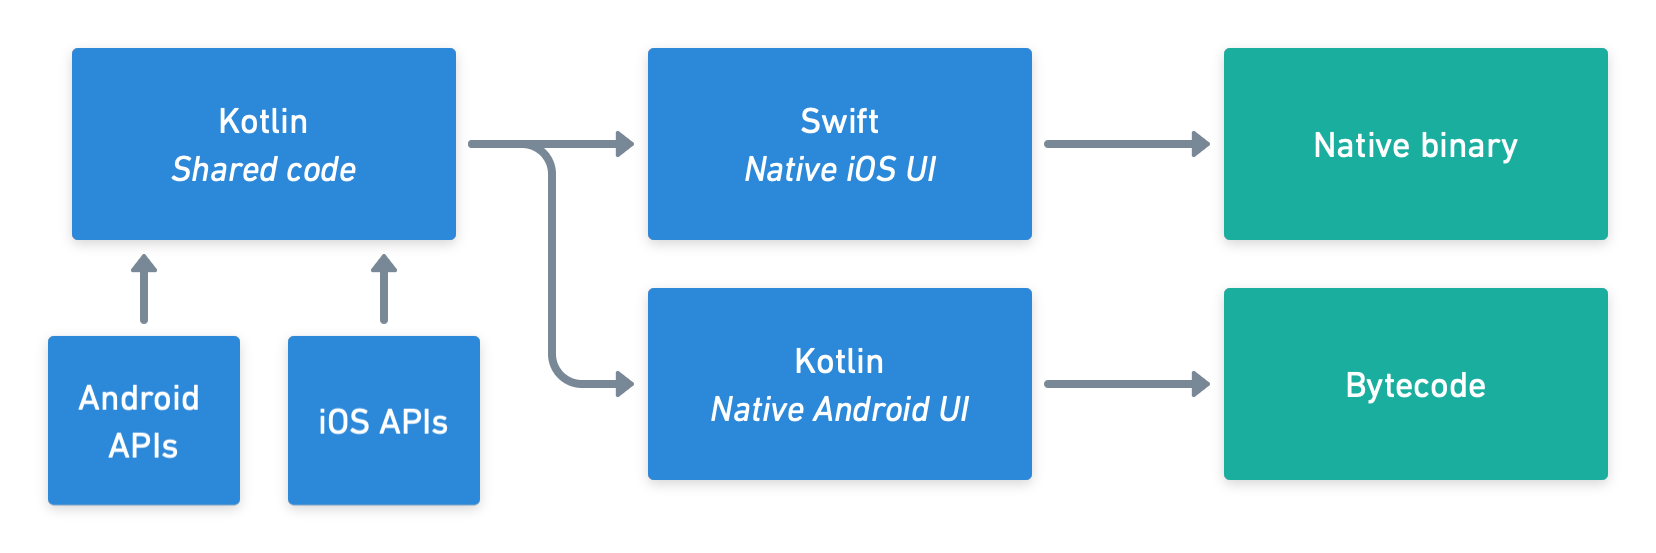 Shared Kotlin code interfaces with the Android and iOS platforms directly